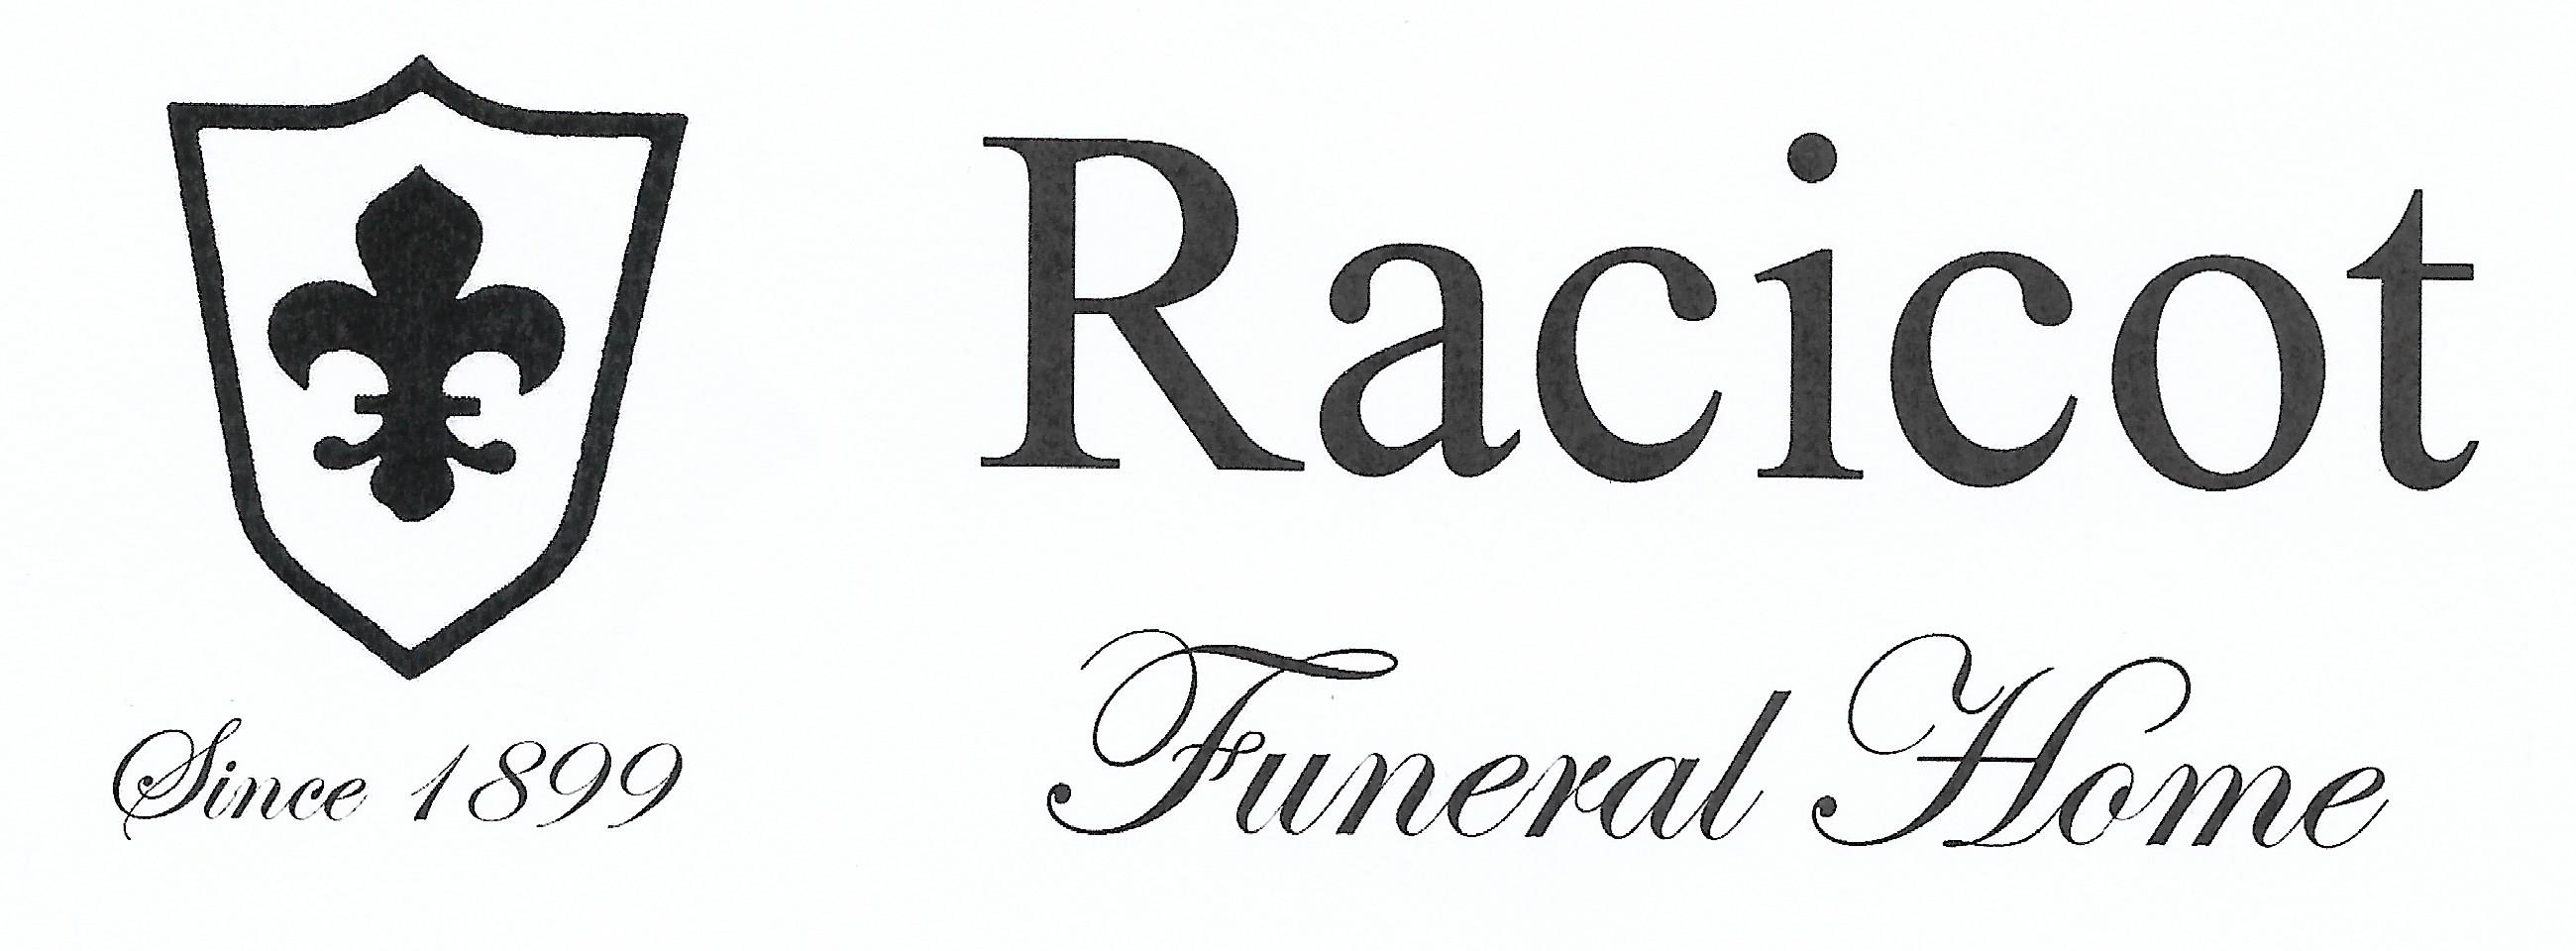 racicot funeral home 001